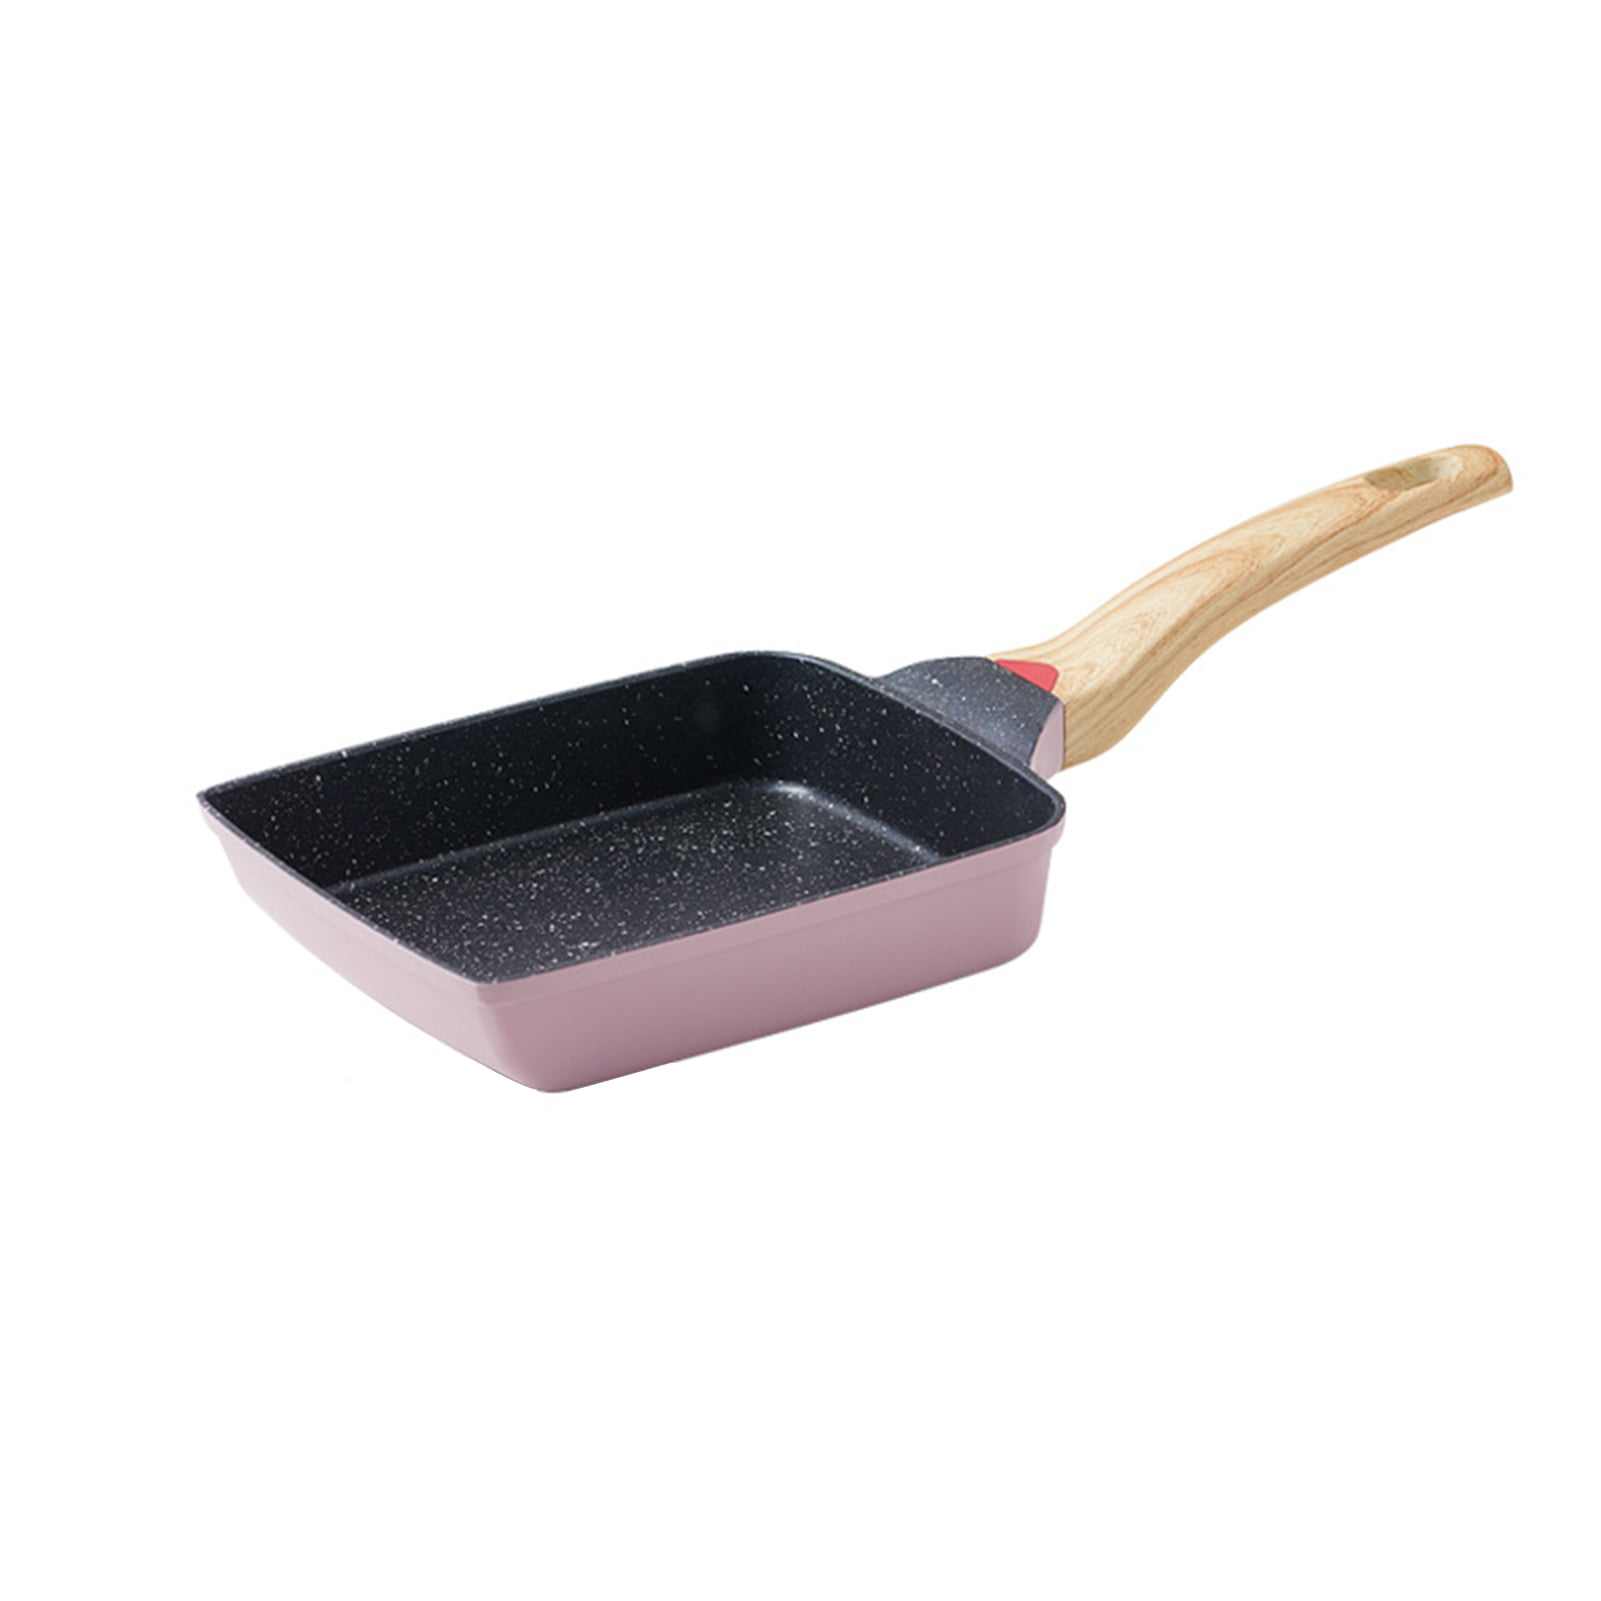 OHOME Breakfast Omelette Pan Non-Stick Japanese Egg Rolled Frying Pot Tamagoyaki Egg Pan Kitchen Cooking Tools